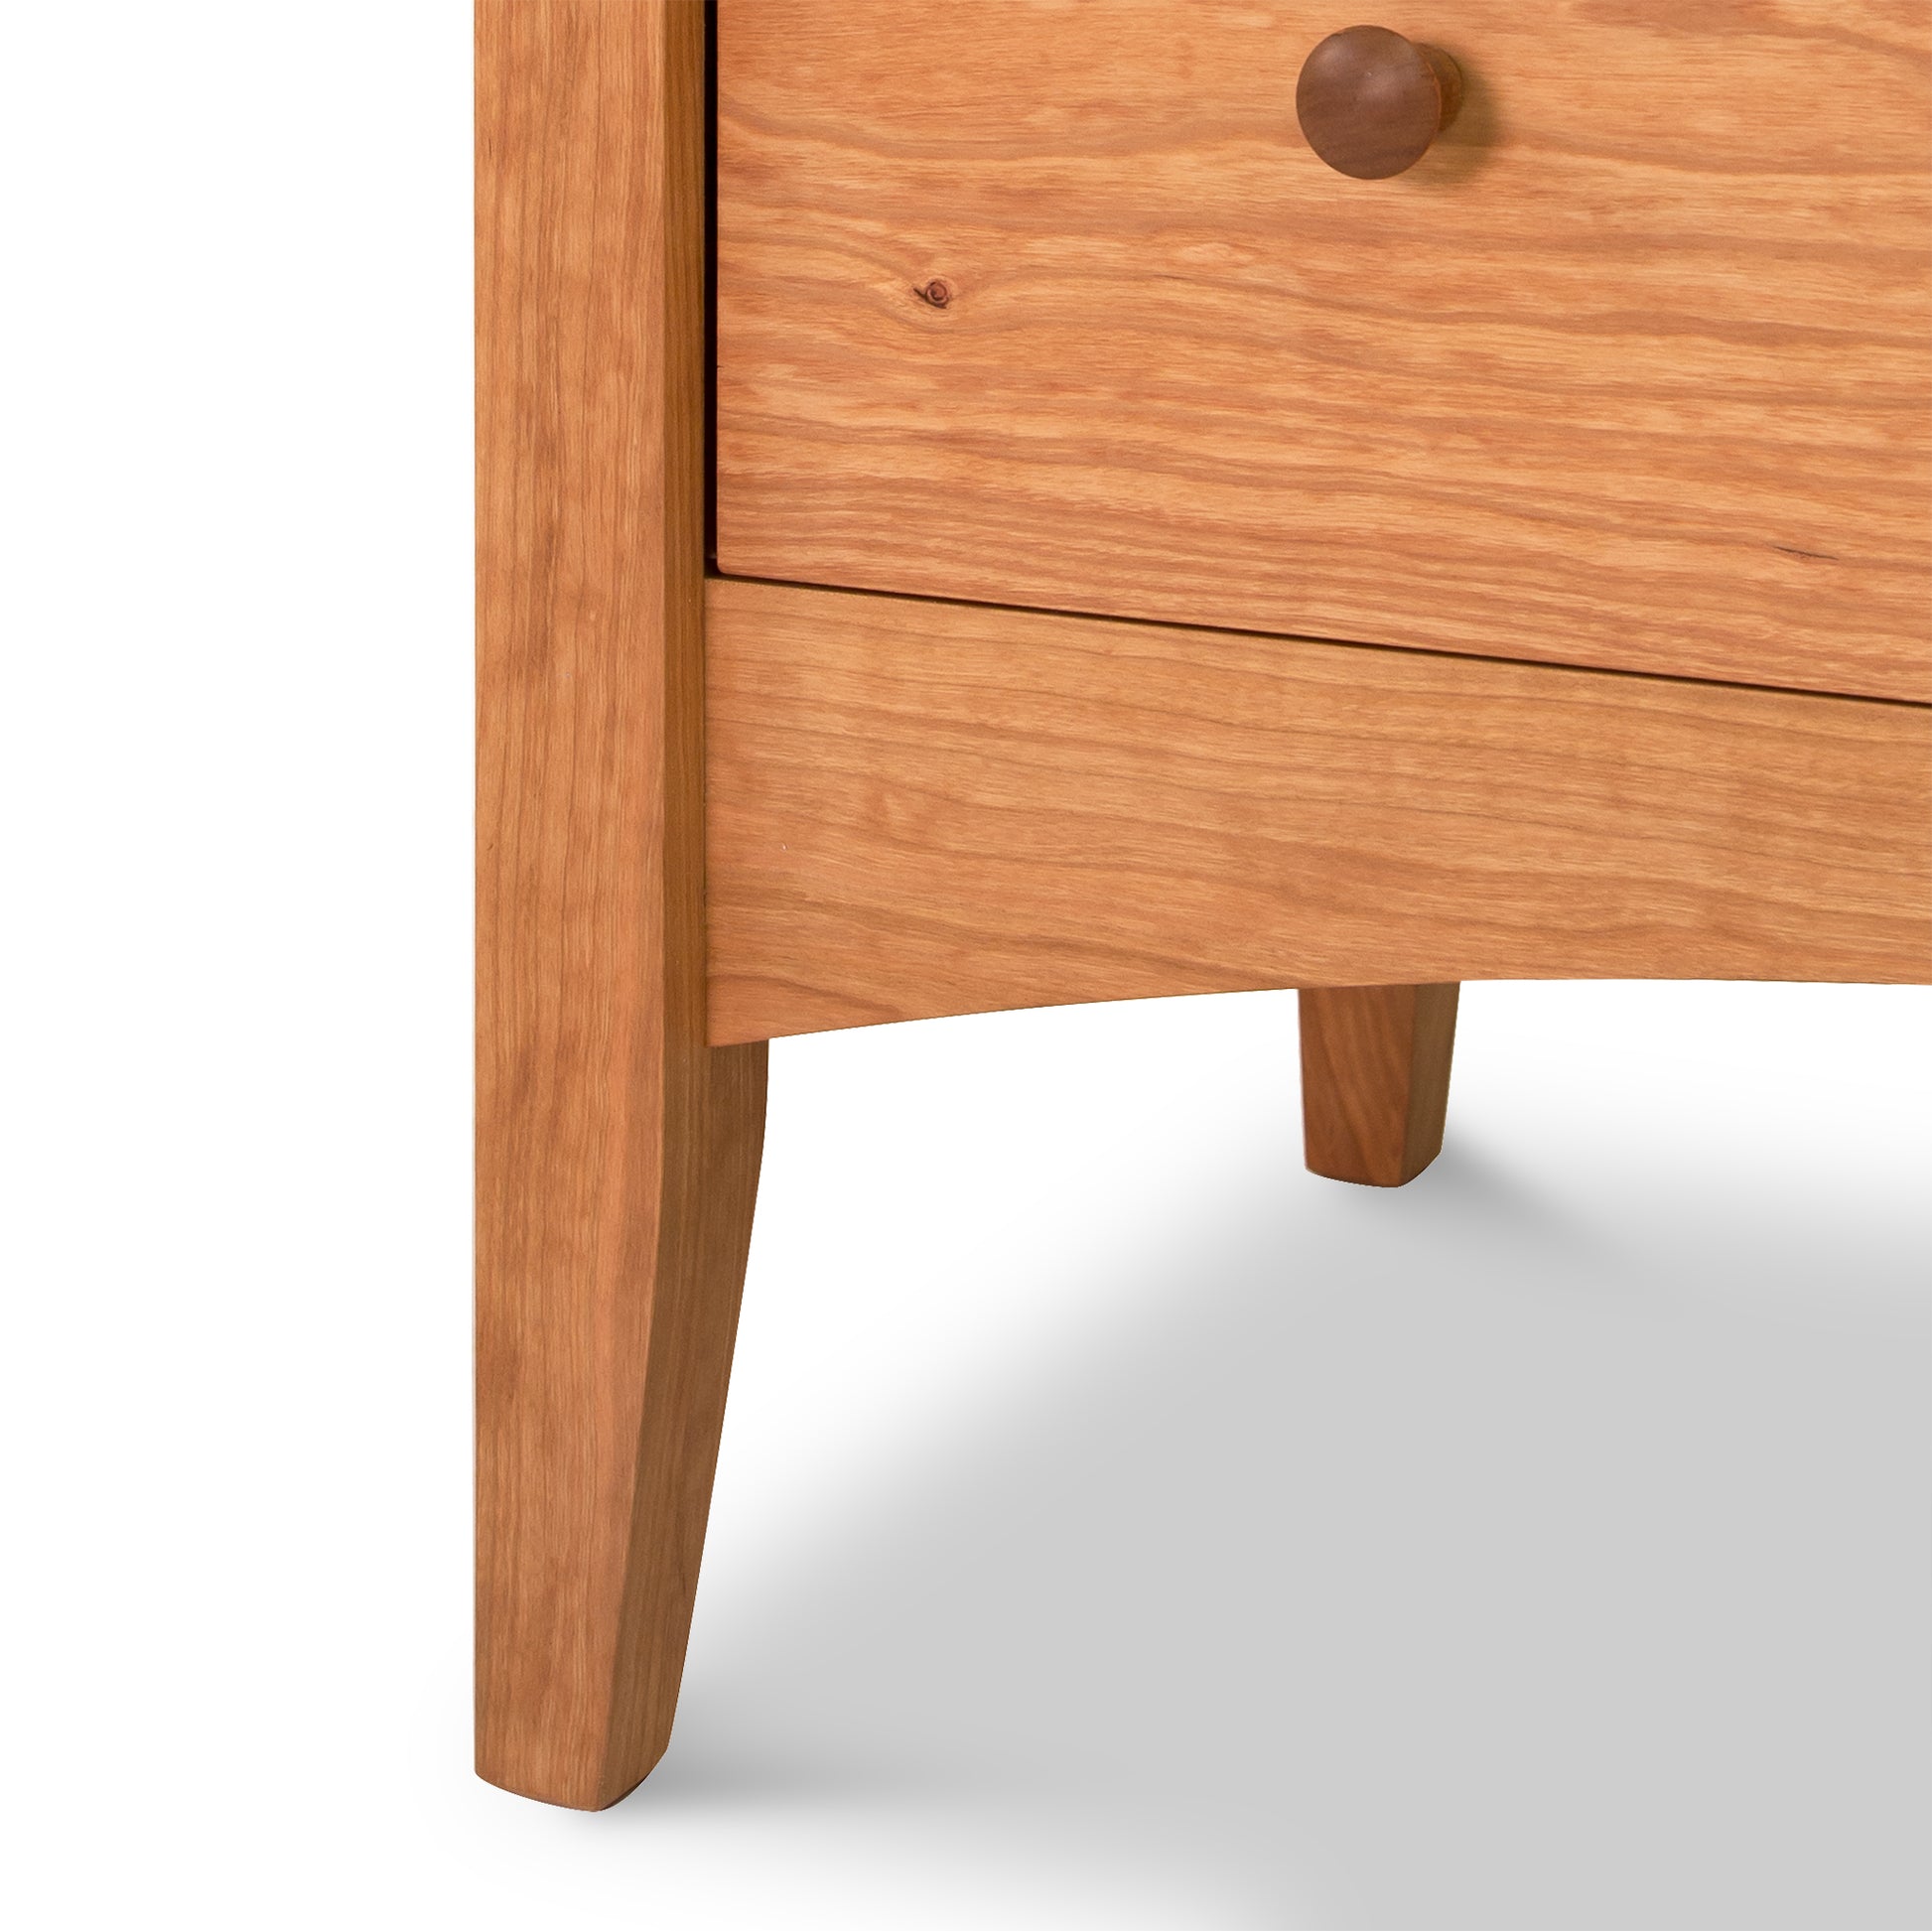 A Maple Corner Woodworks American Shaker 5-Drawer Chest featuring a single drawer with a round knob, set against a white background.